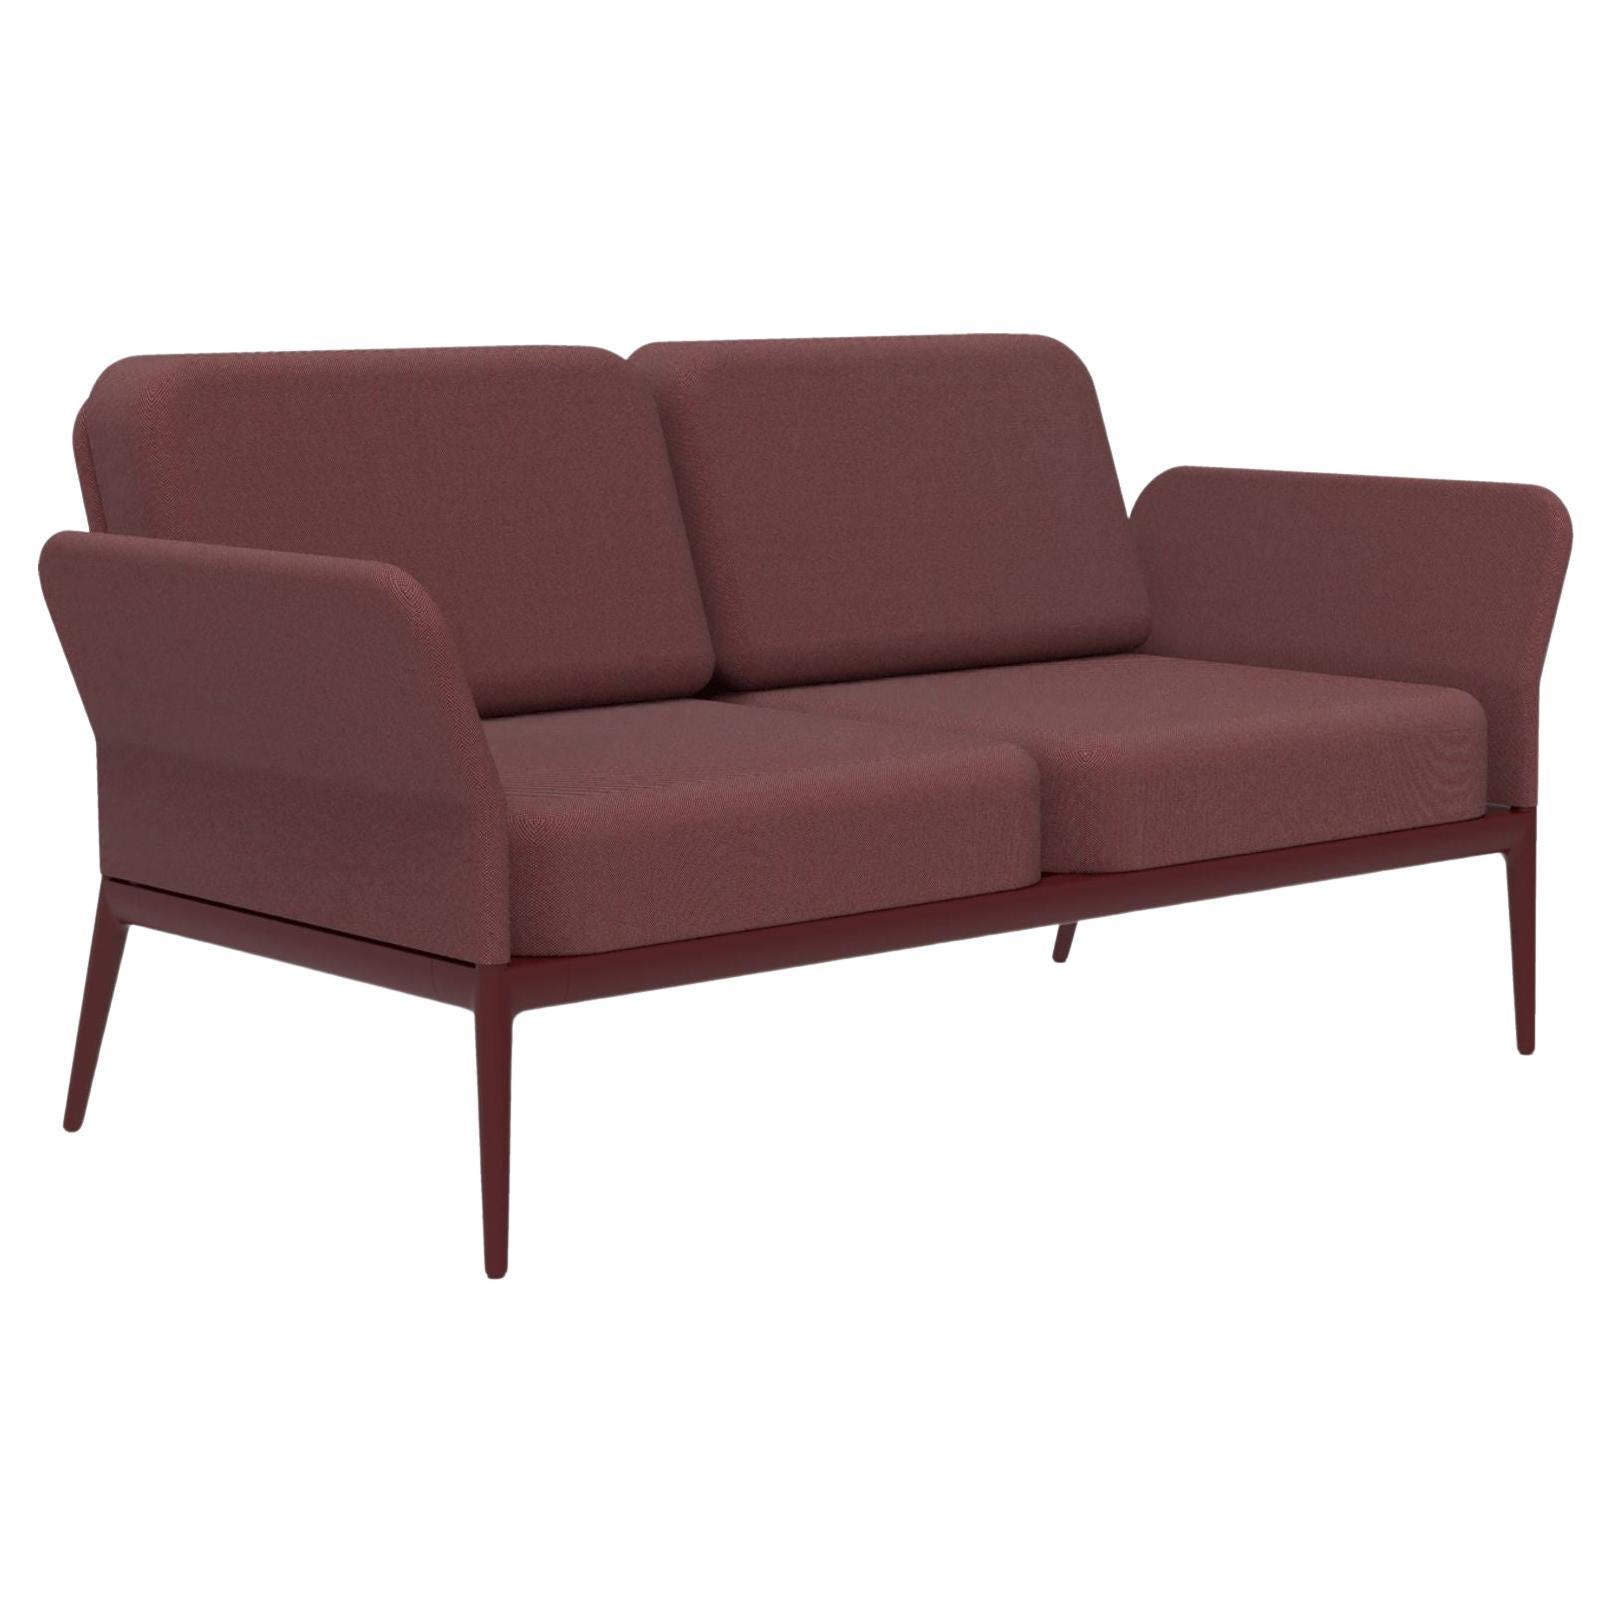 Cover Burgundy Sofa by Mowee For Sale